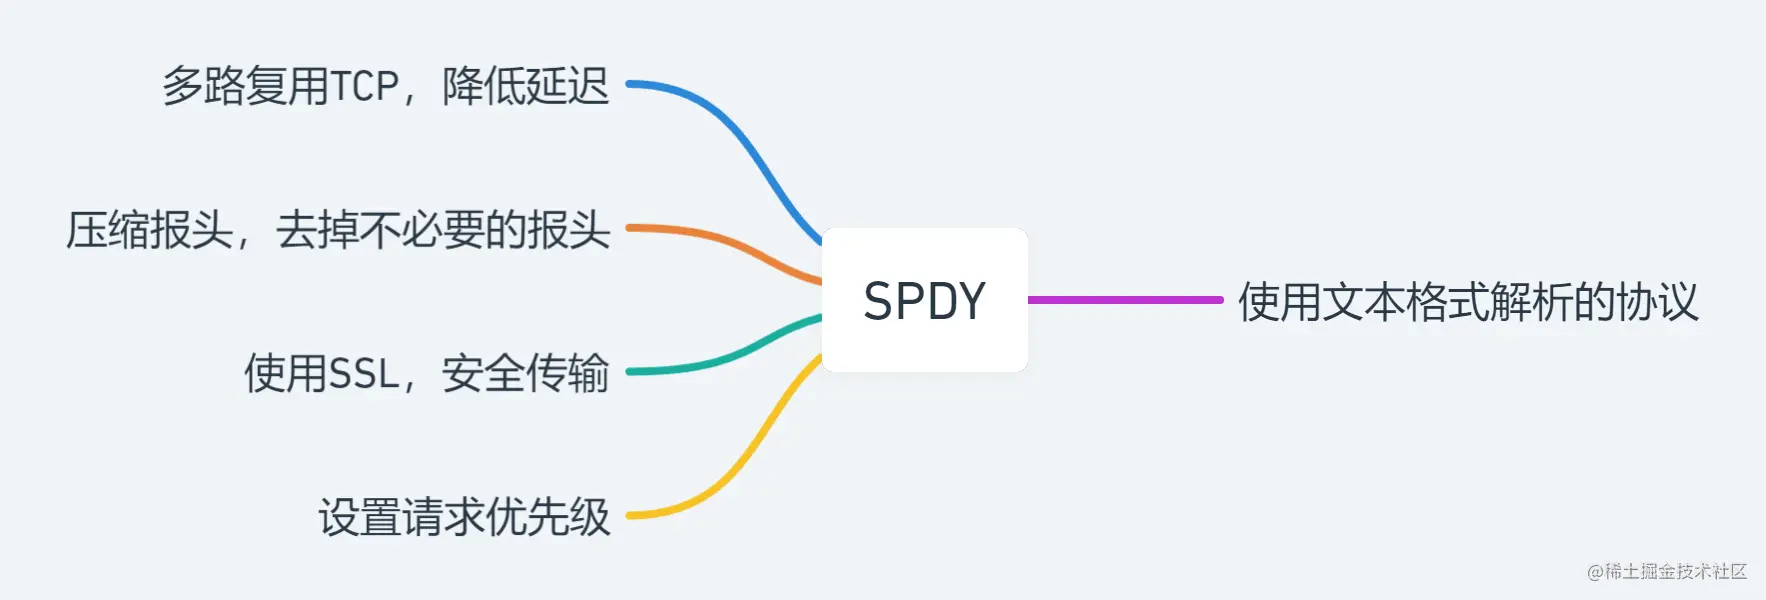 SPDY.png